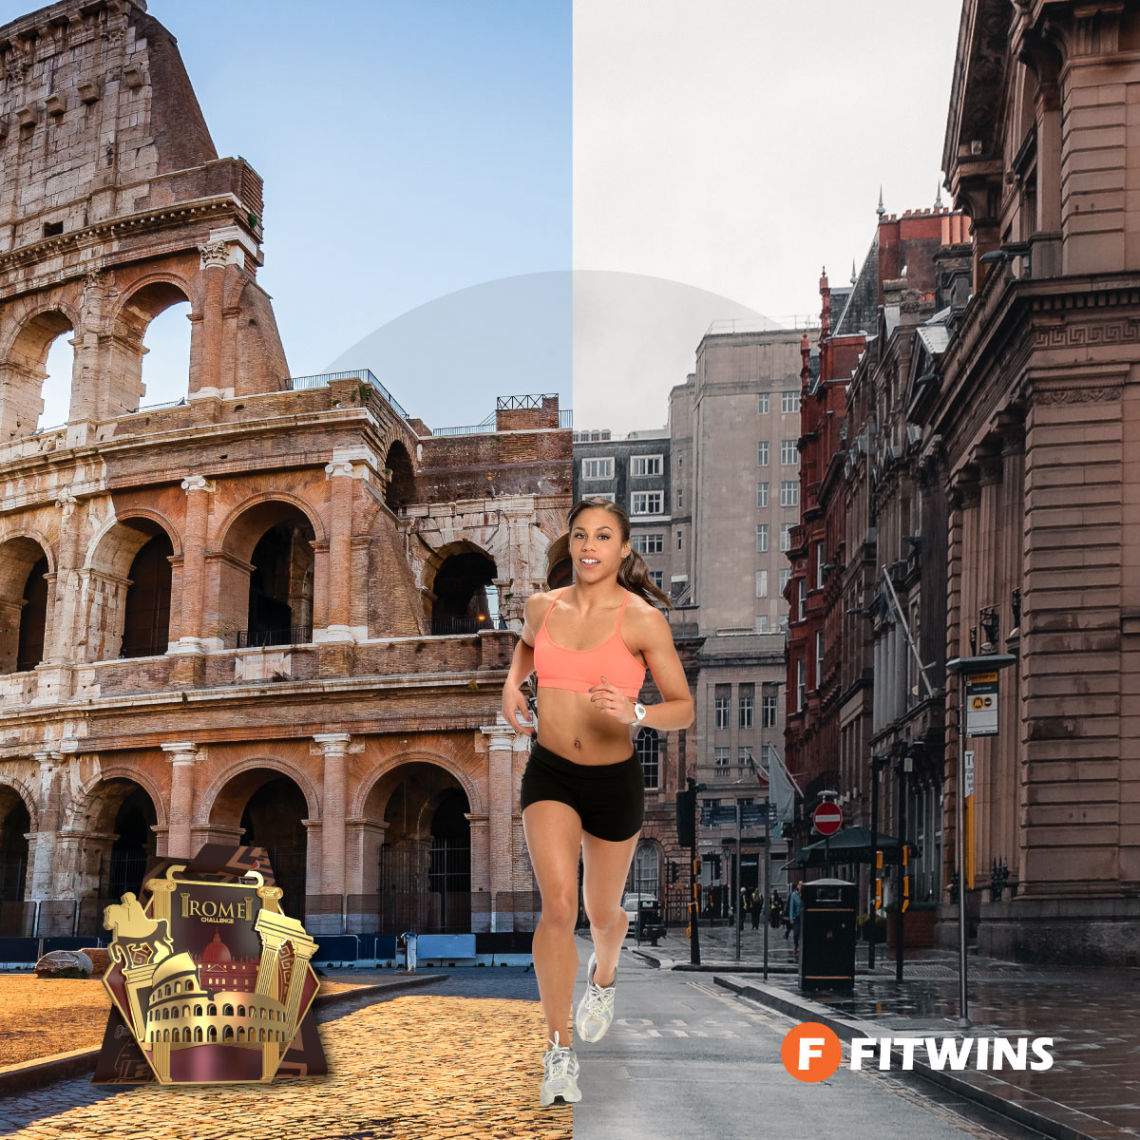 A split screen image with one half showing the Colosseum of Rome and a street, with a lady running along the centre